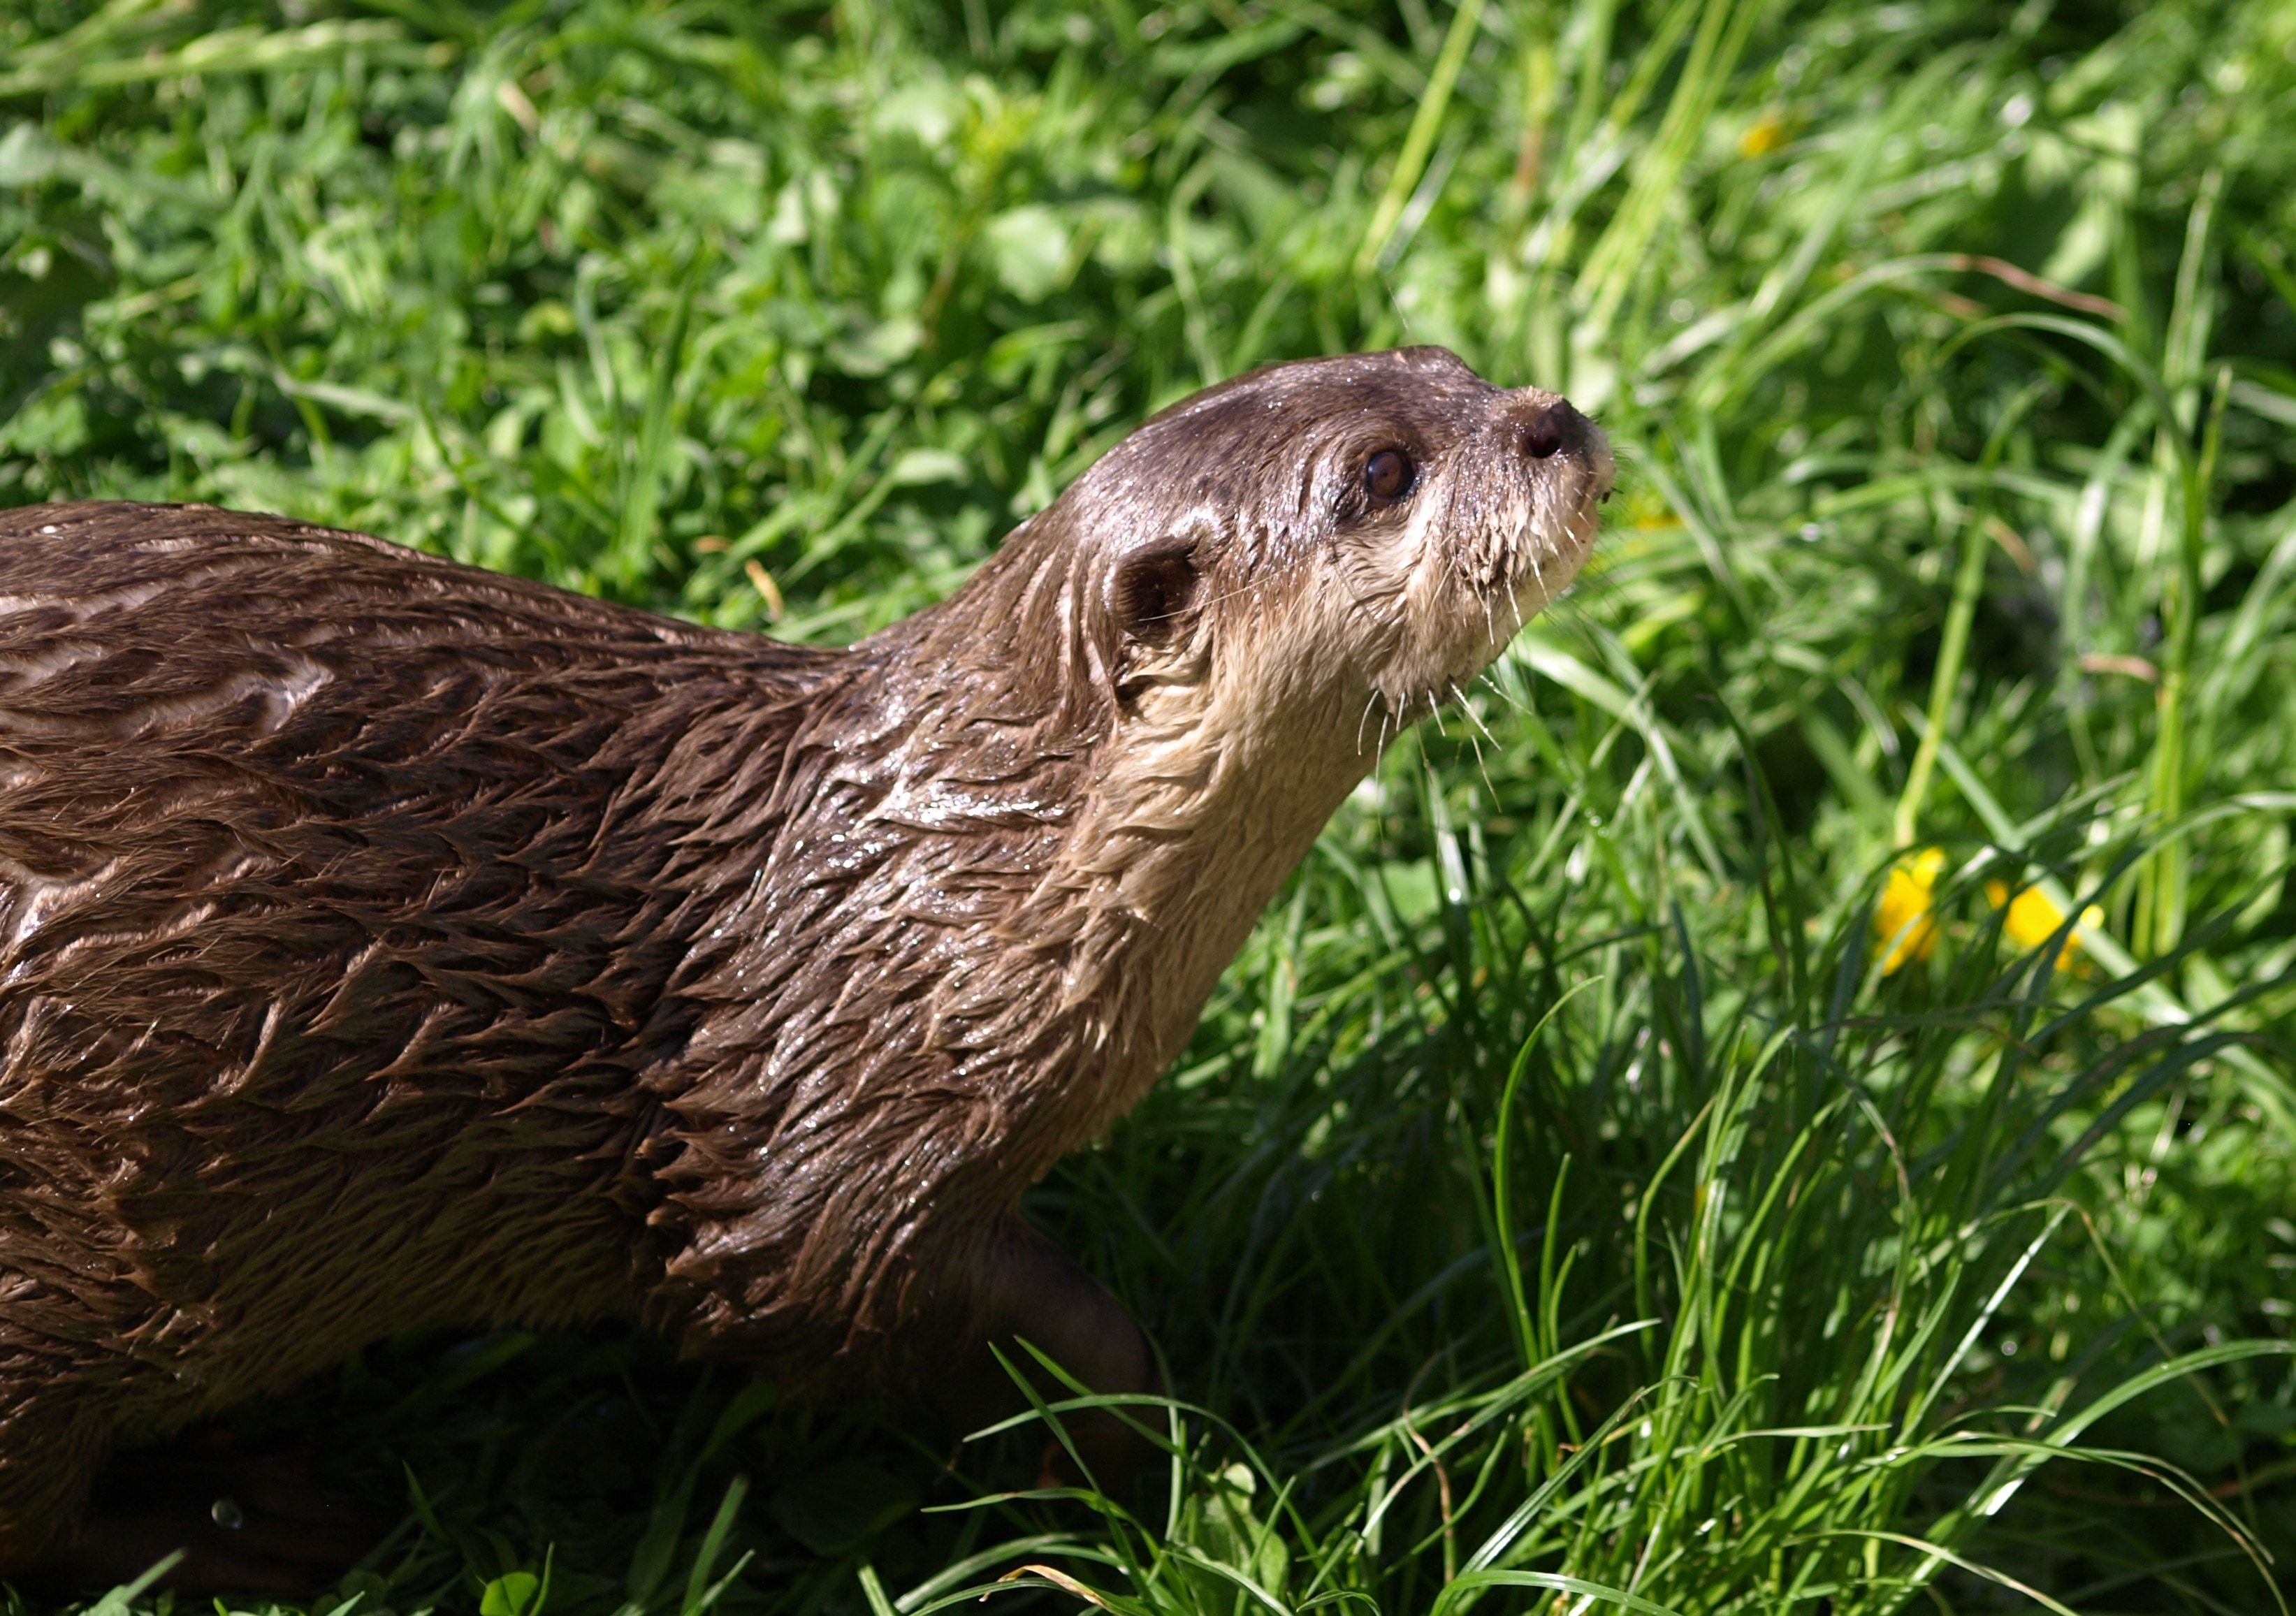 Otter, Animals, Fur, Wet, Curious, Cute, one animal, animal themes